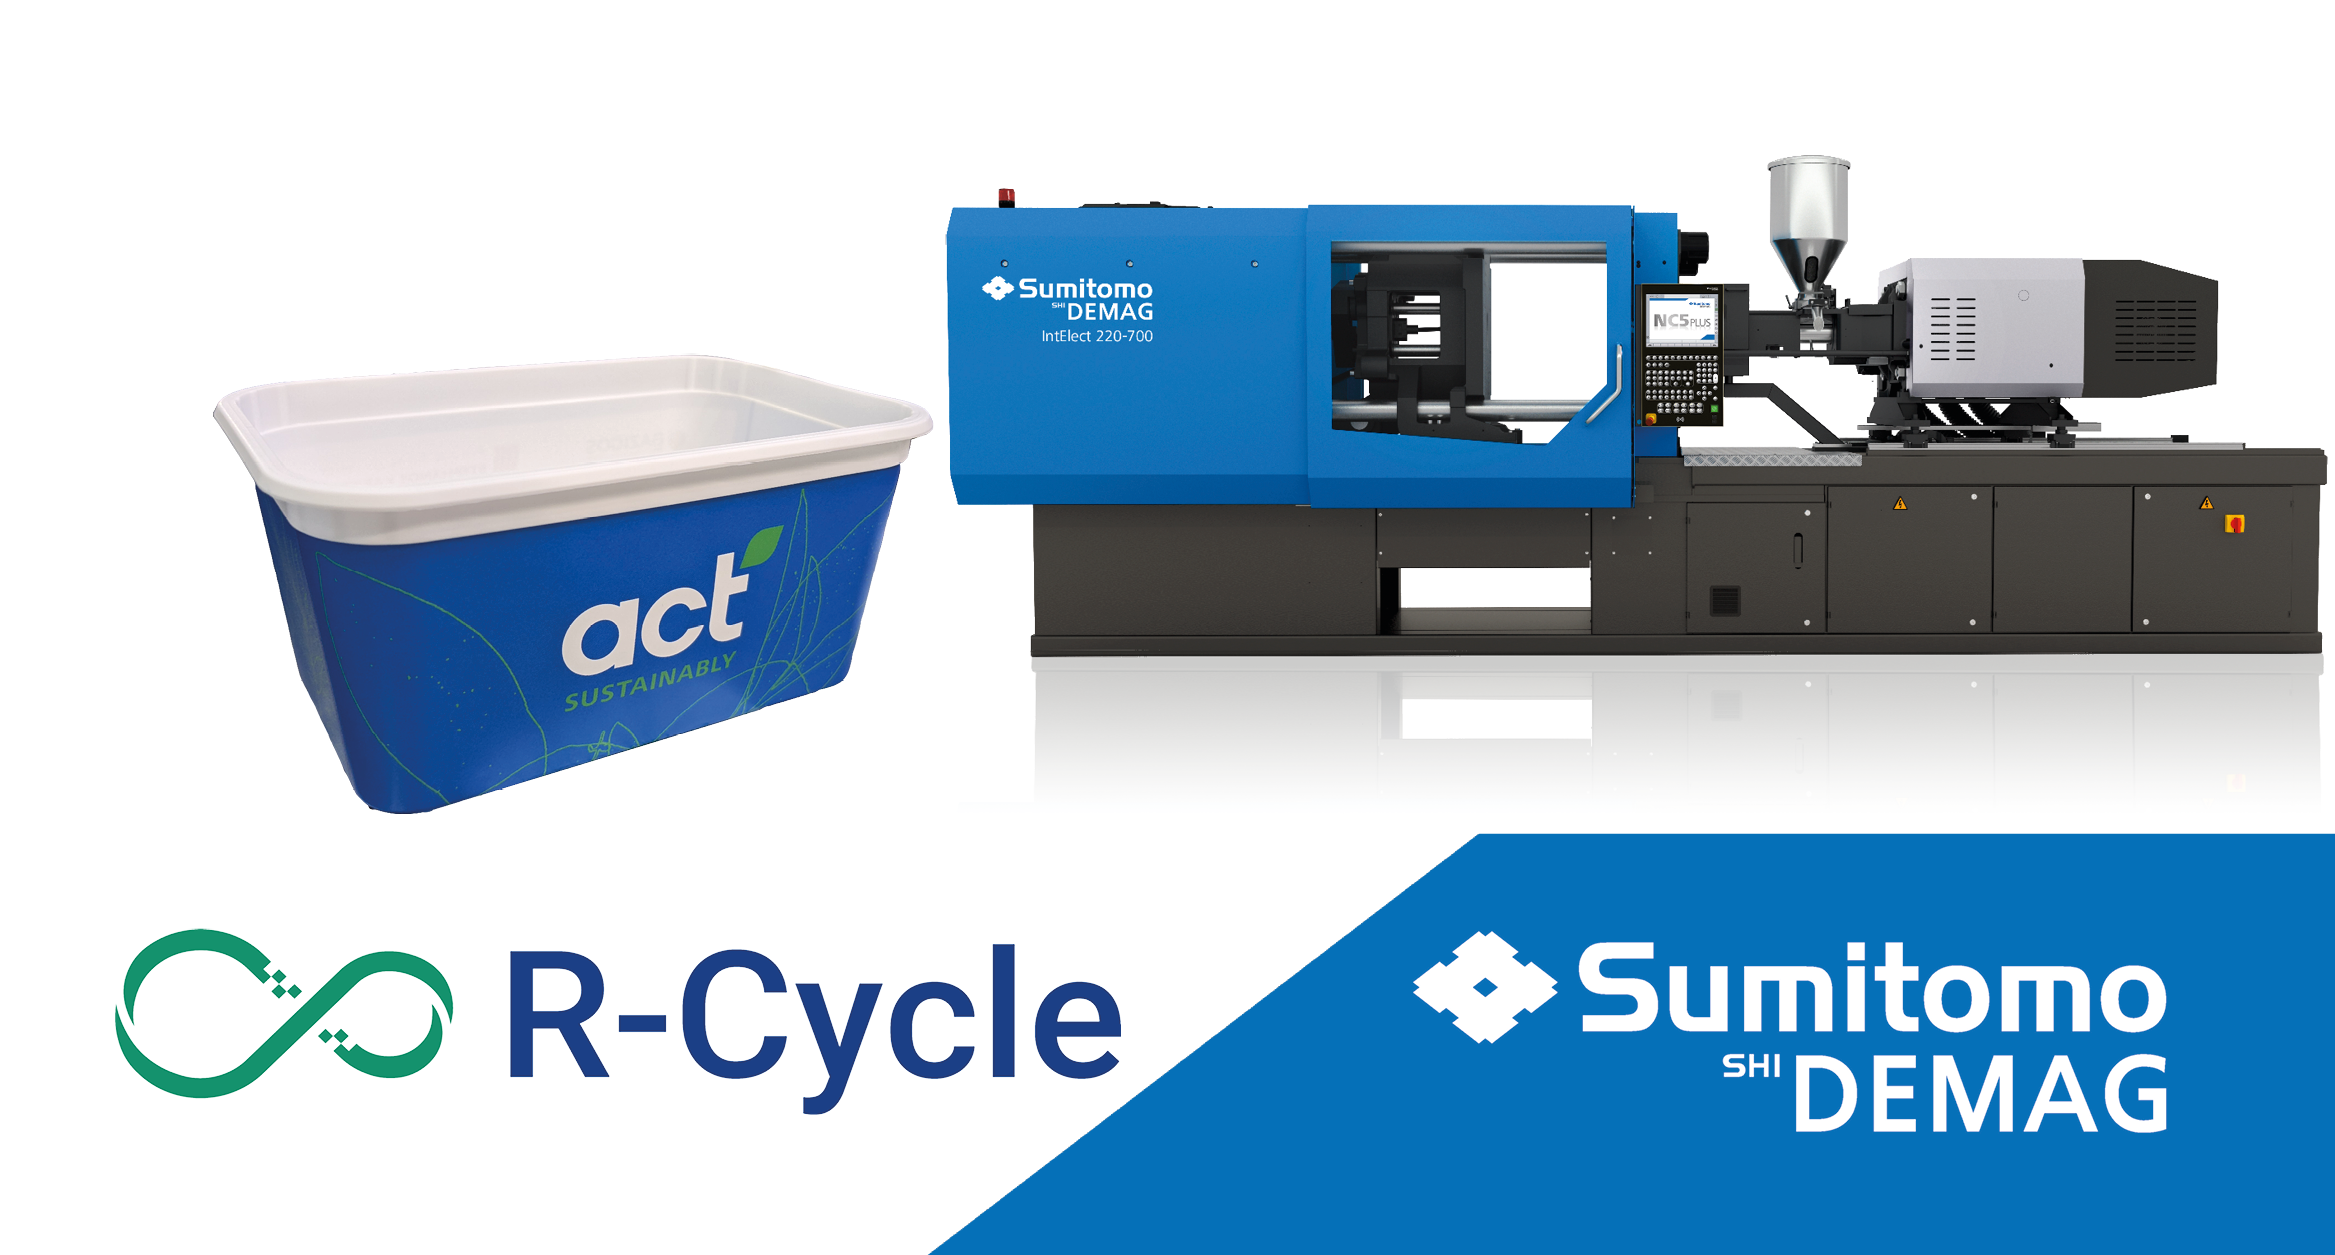 Sumitomo (SHI) Demag joins the R-Cycle Community